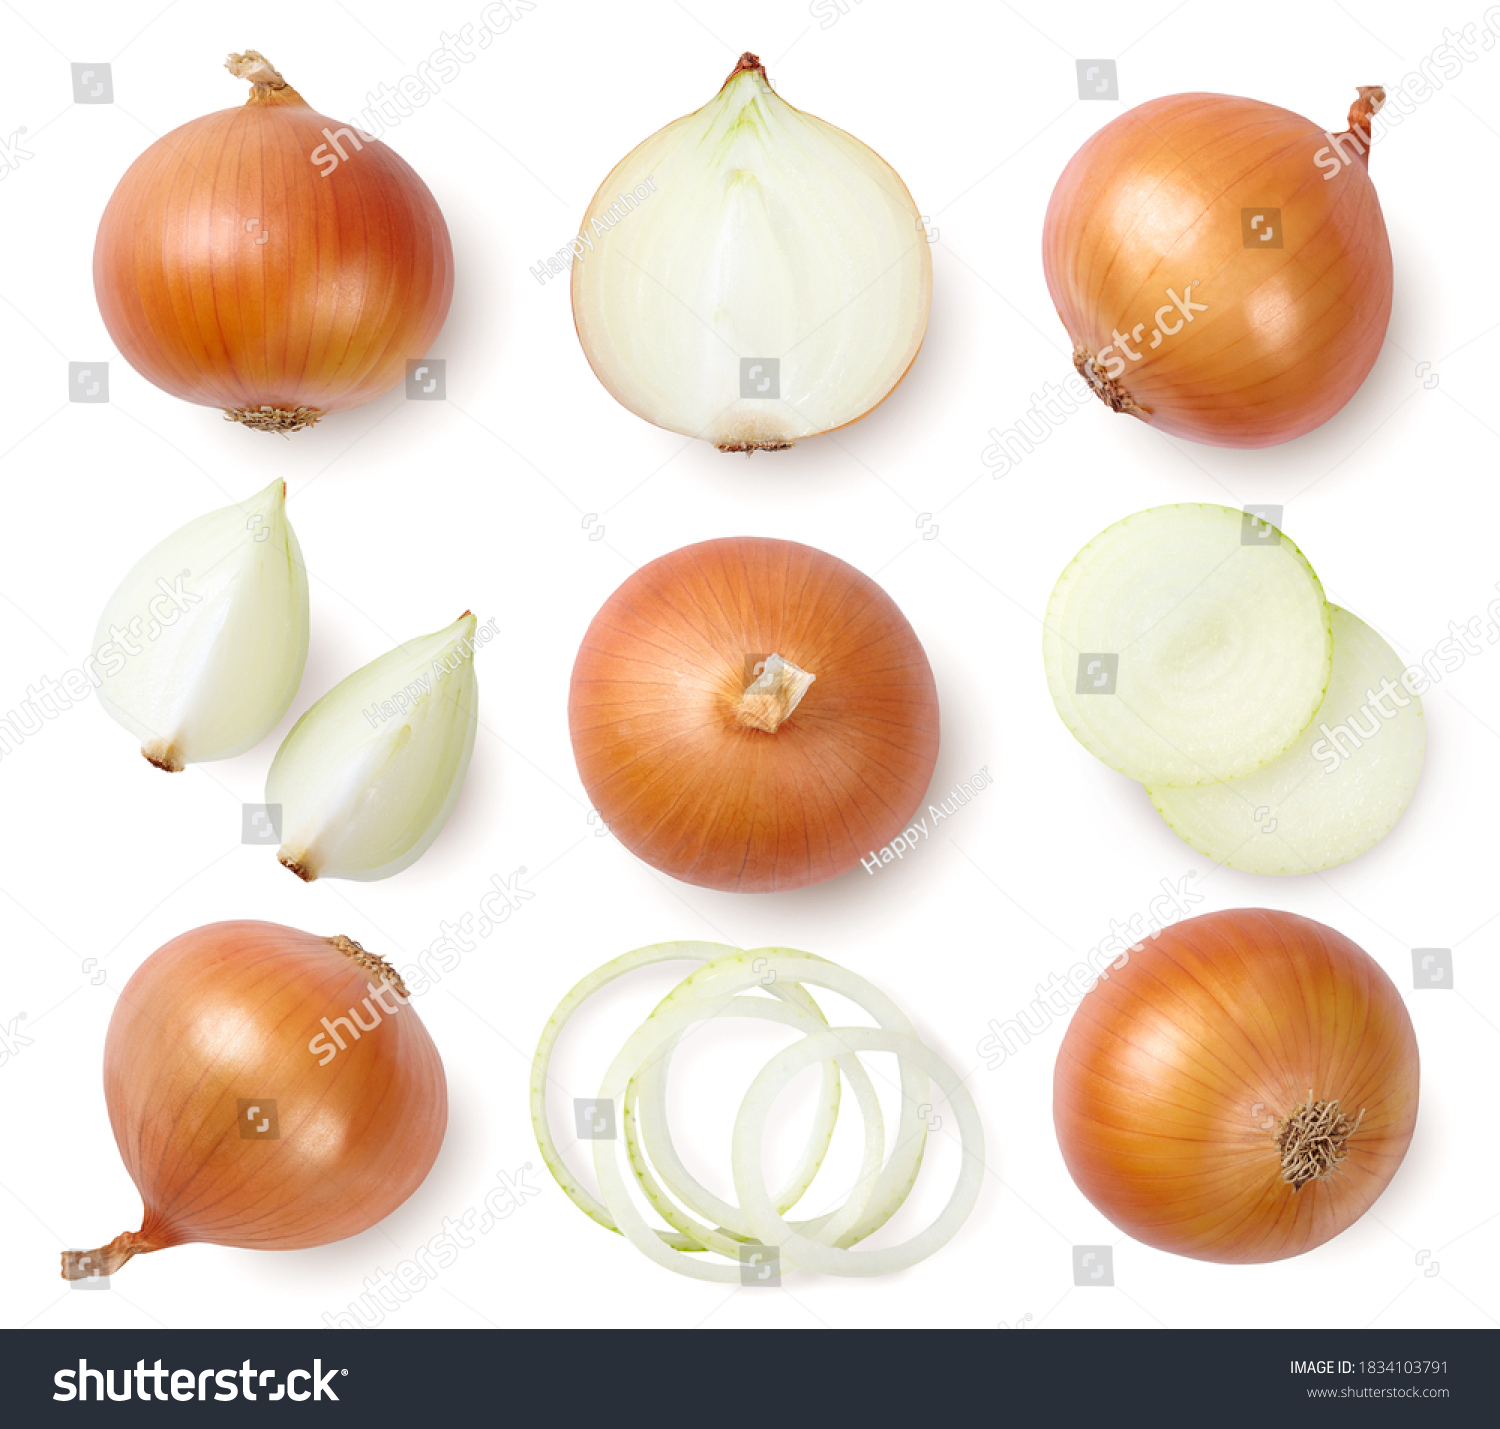 Whole and sliced onion bulbs isolated on white background. Top view. #1834103791